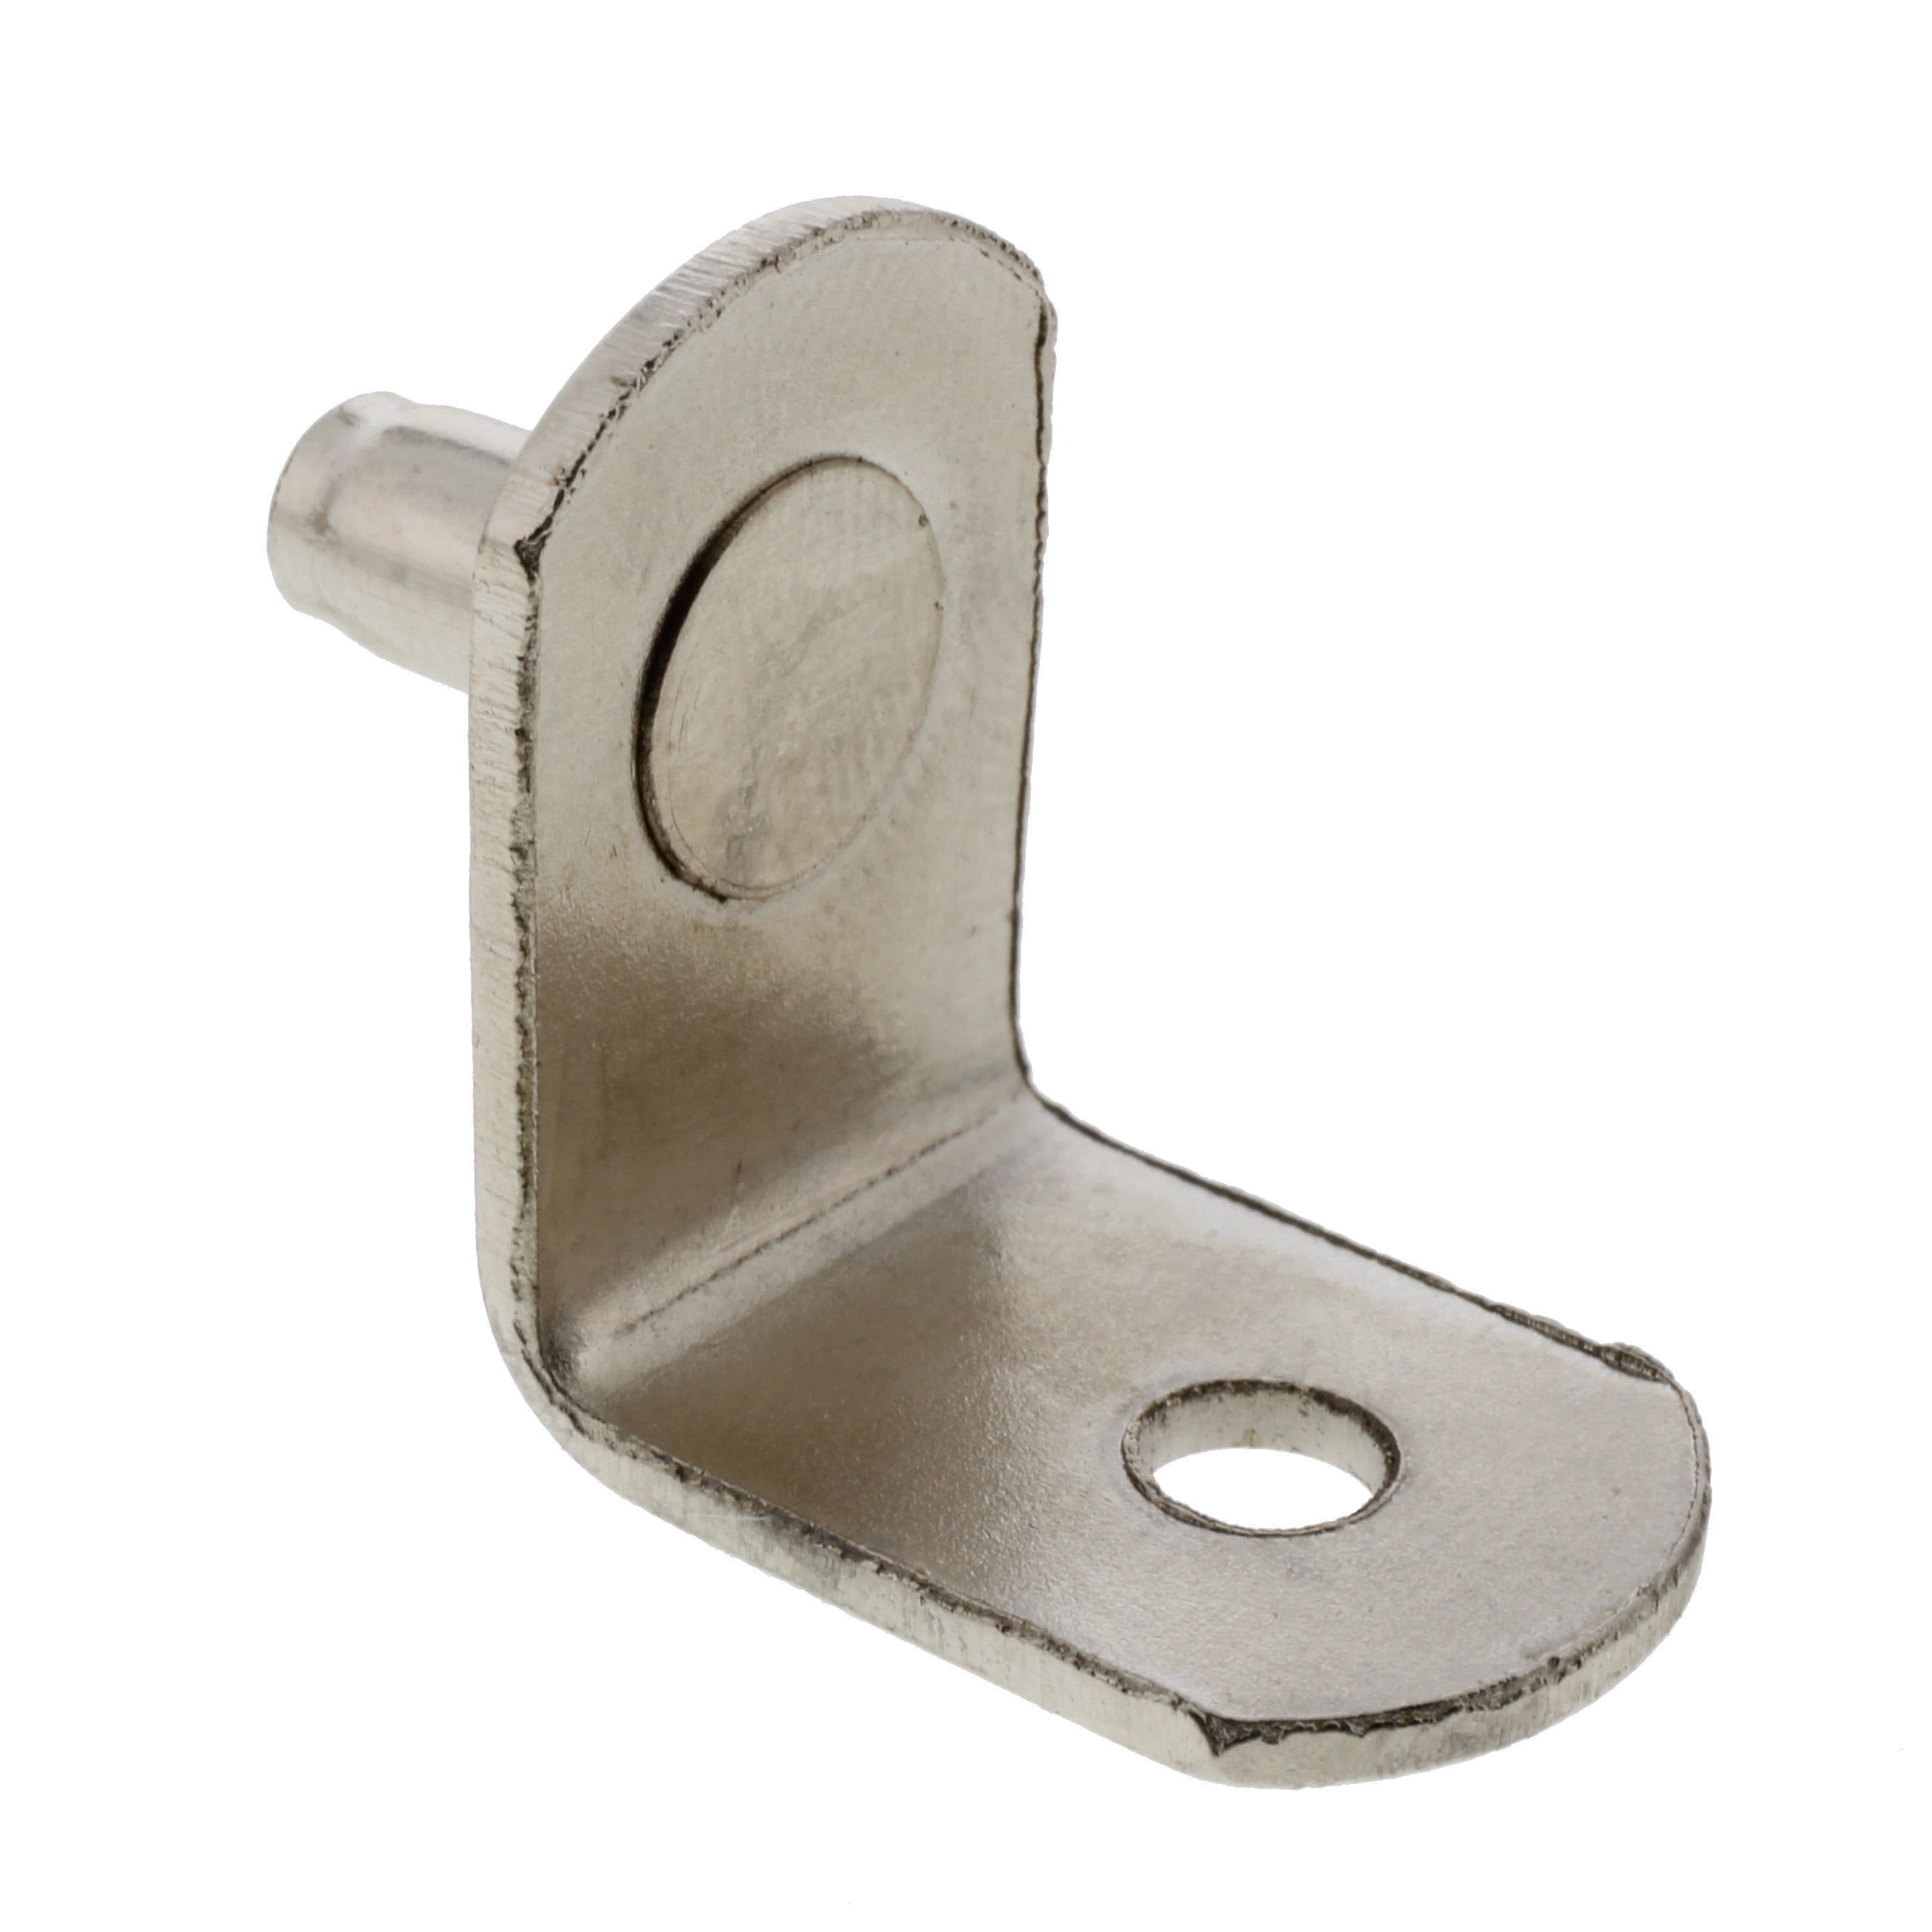 Details about   8-48 WHITE SHELF SUPPORTS PUSH IN SUPPORT PINS PEGS FIXINGS 5mm HOLE SHELVES 